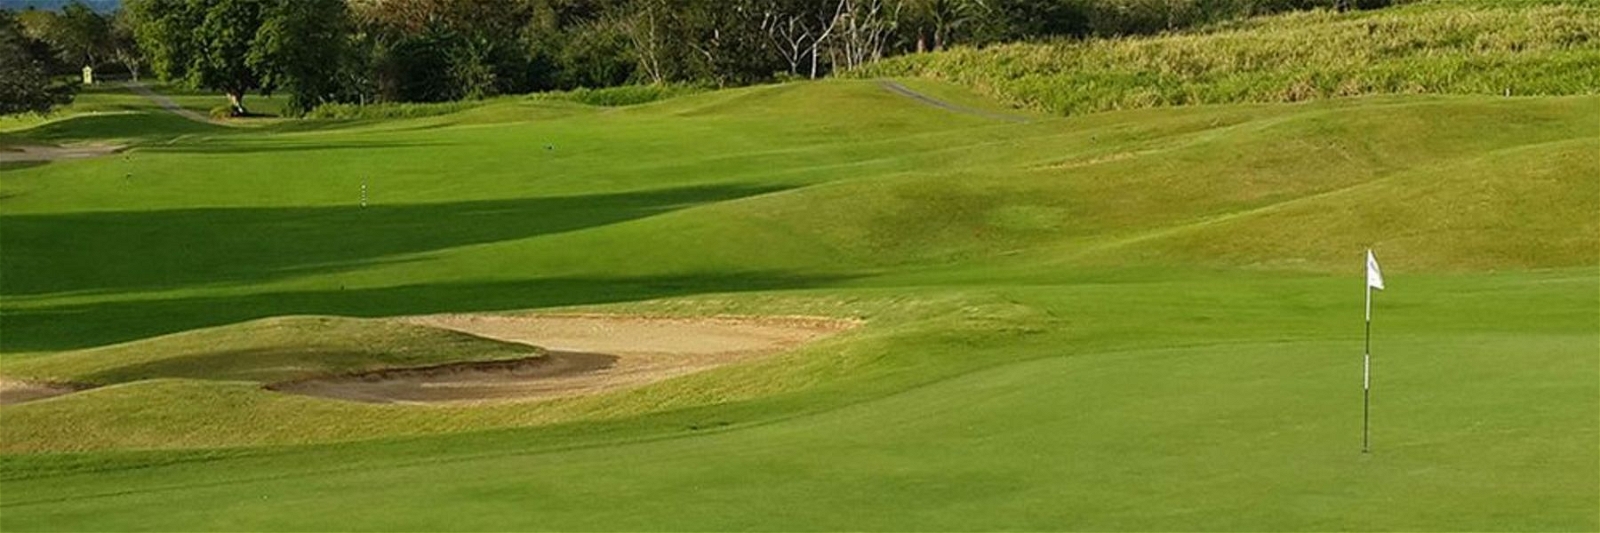 Golf Vacation Package - Palmas Athletic Club - The Flamboyan Course